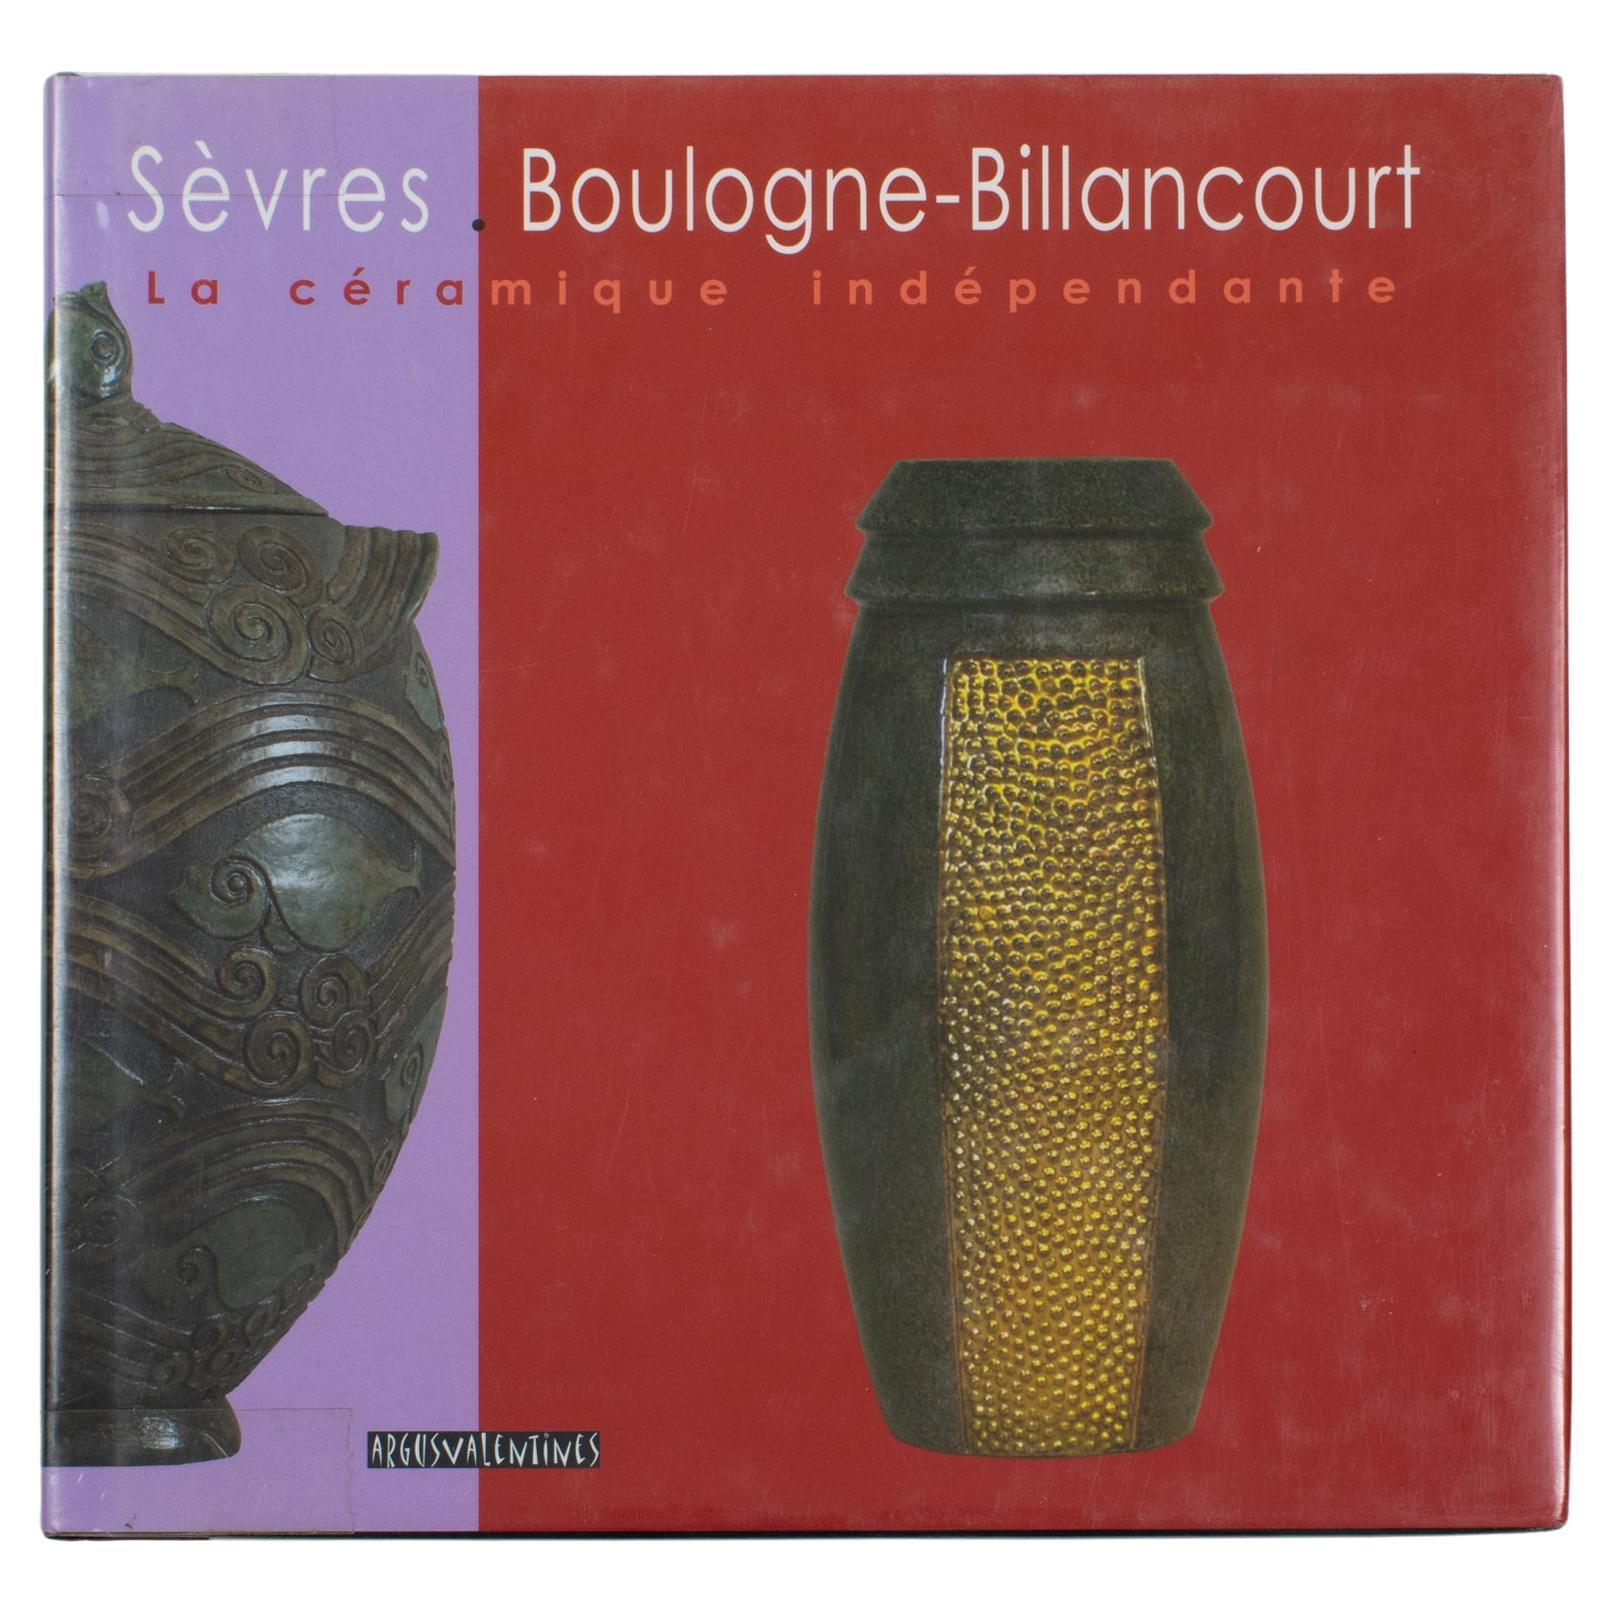 Sevres Boulogne-Billancourt, Independent Ceramic, French Book by F. Slitine 2007 For Sale